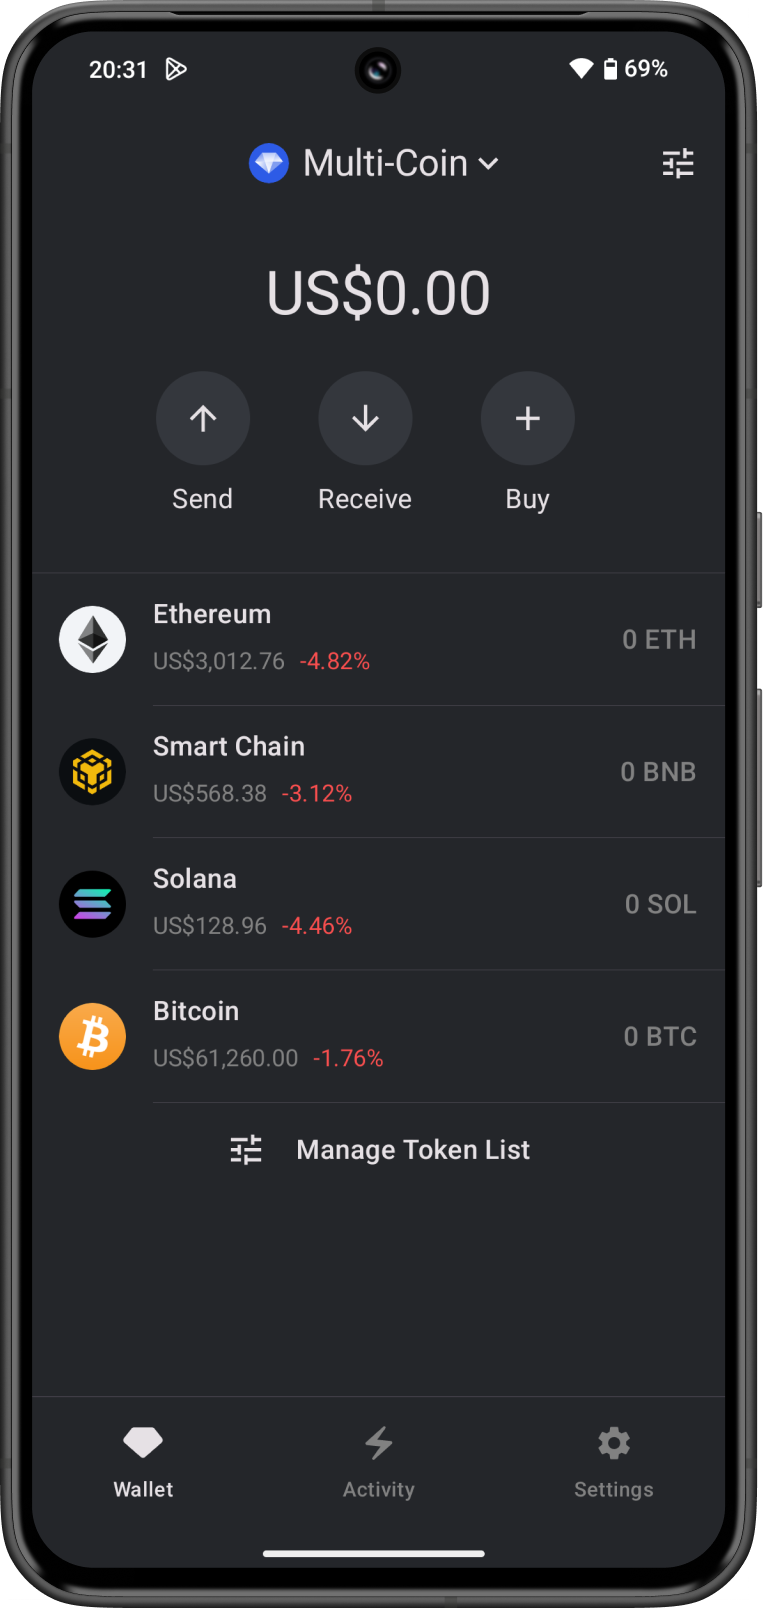 Start Using Gem Wallet on Android